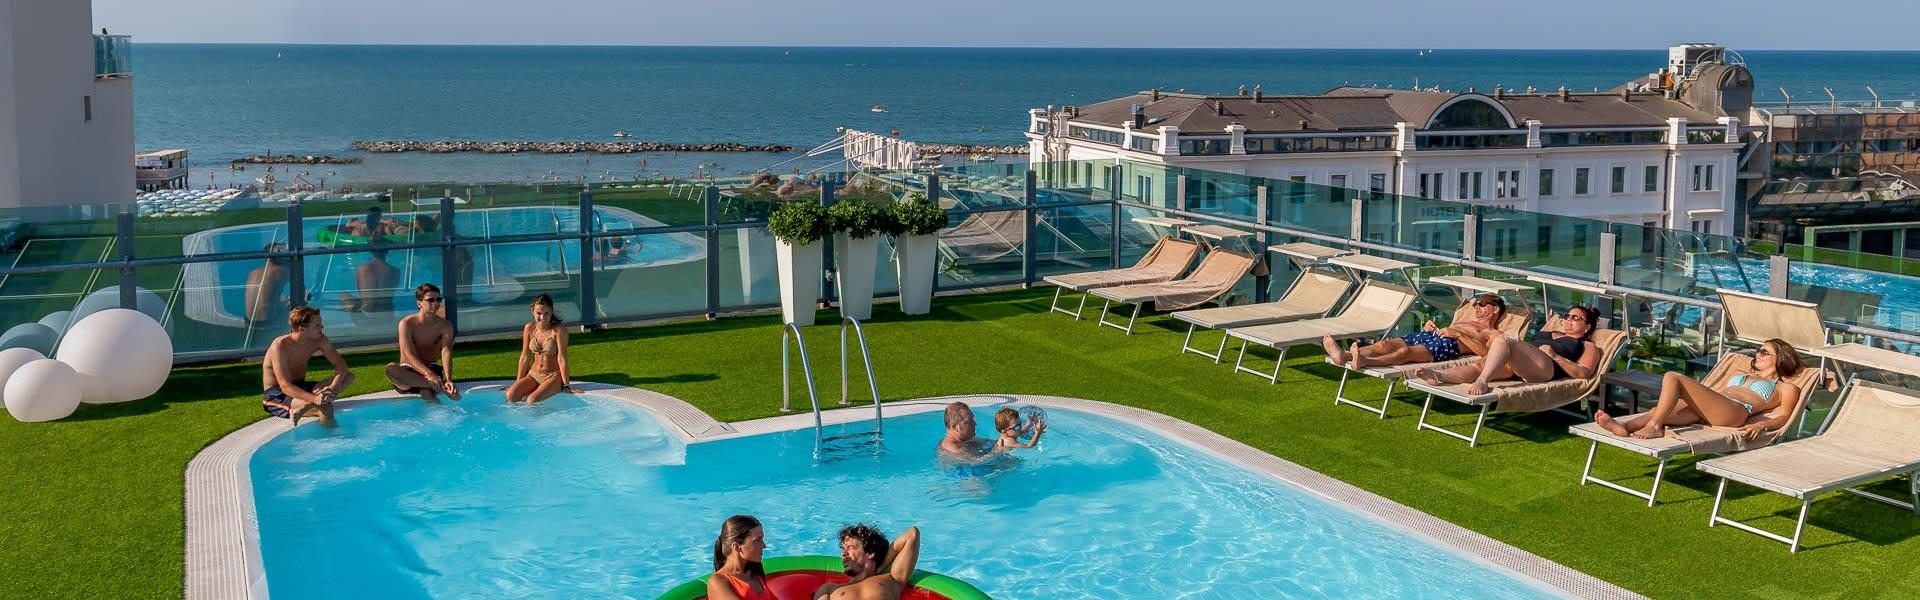 hotelsanmarcocattolica fr offre-speciale-paques-a-l-hotel-a-cattolica 003